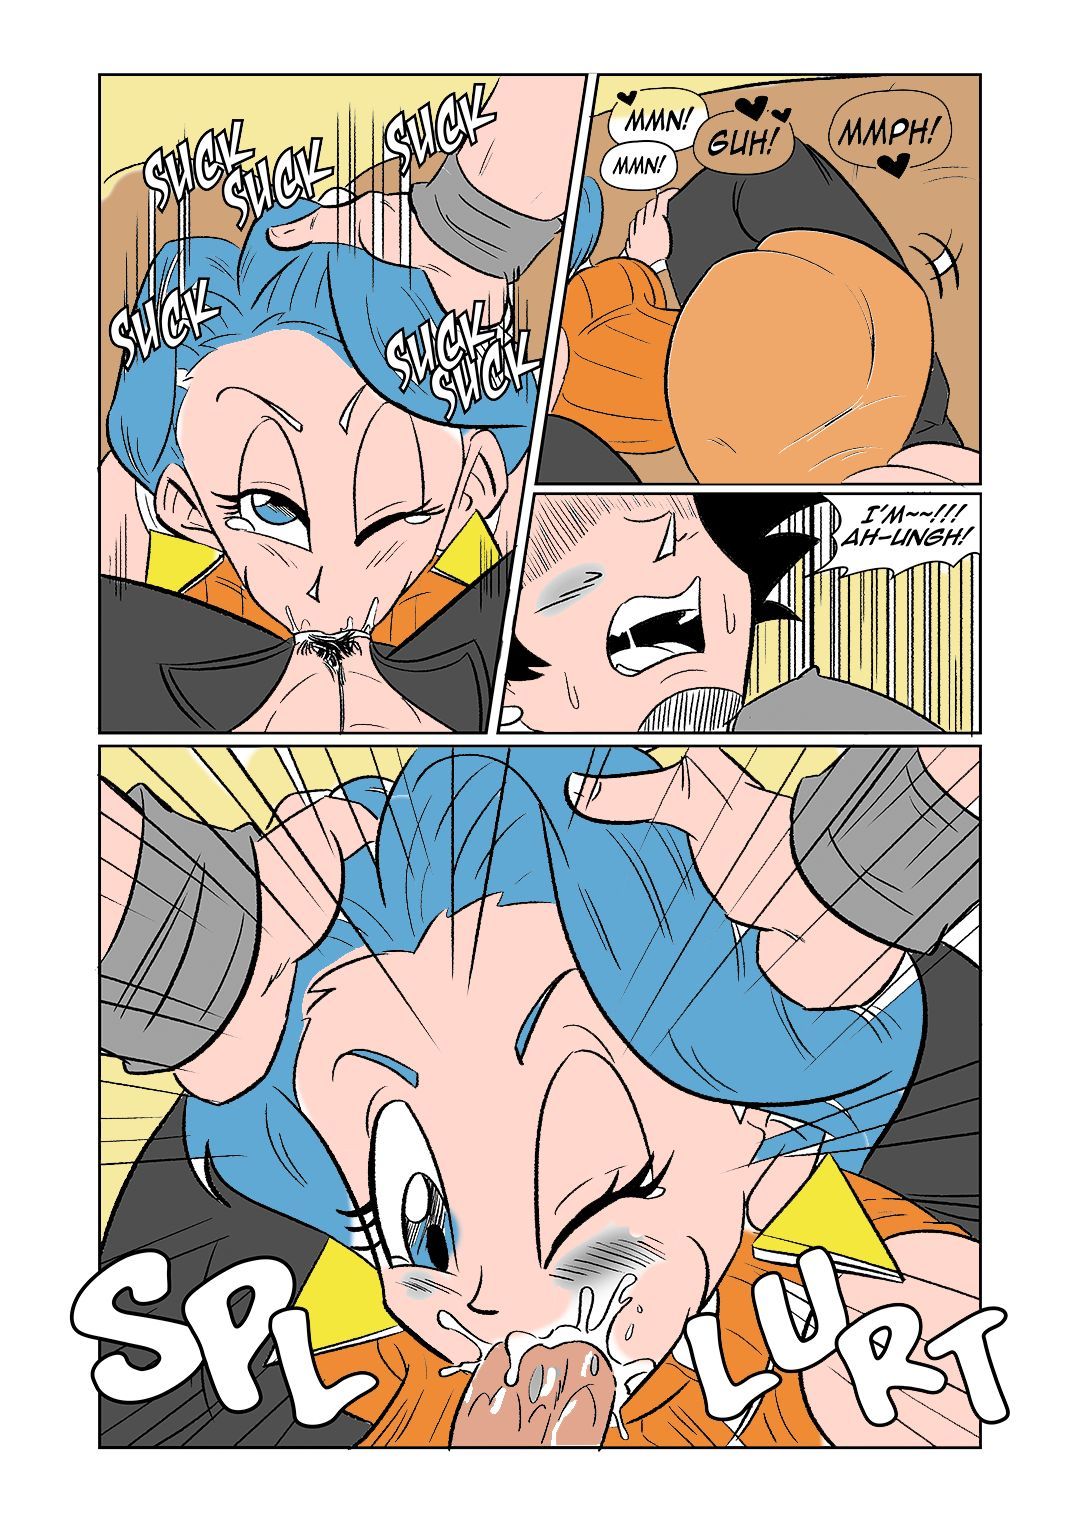 The Switch Up (Dragon Ball Z) by Funsexydb page 16